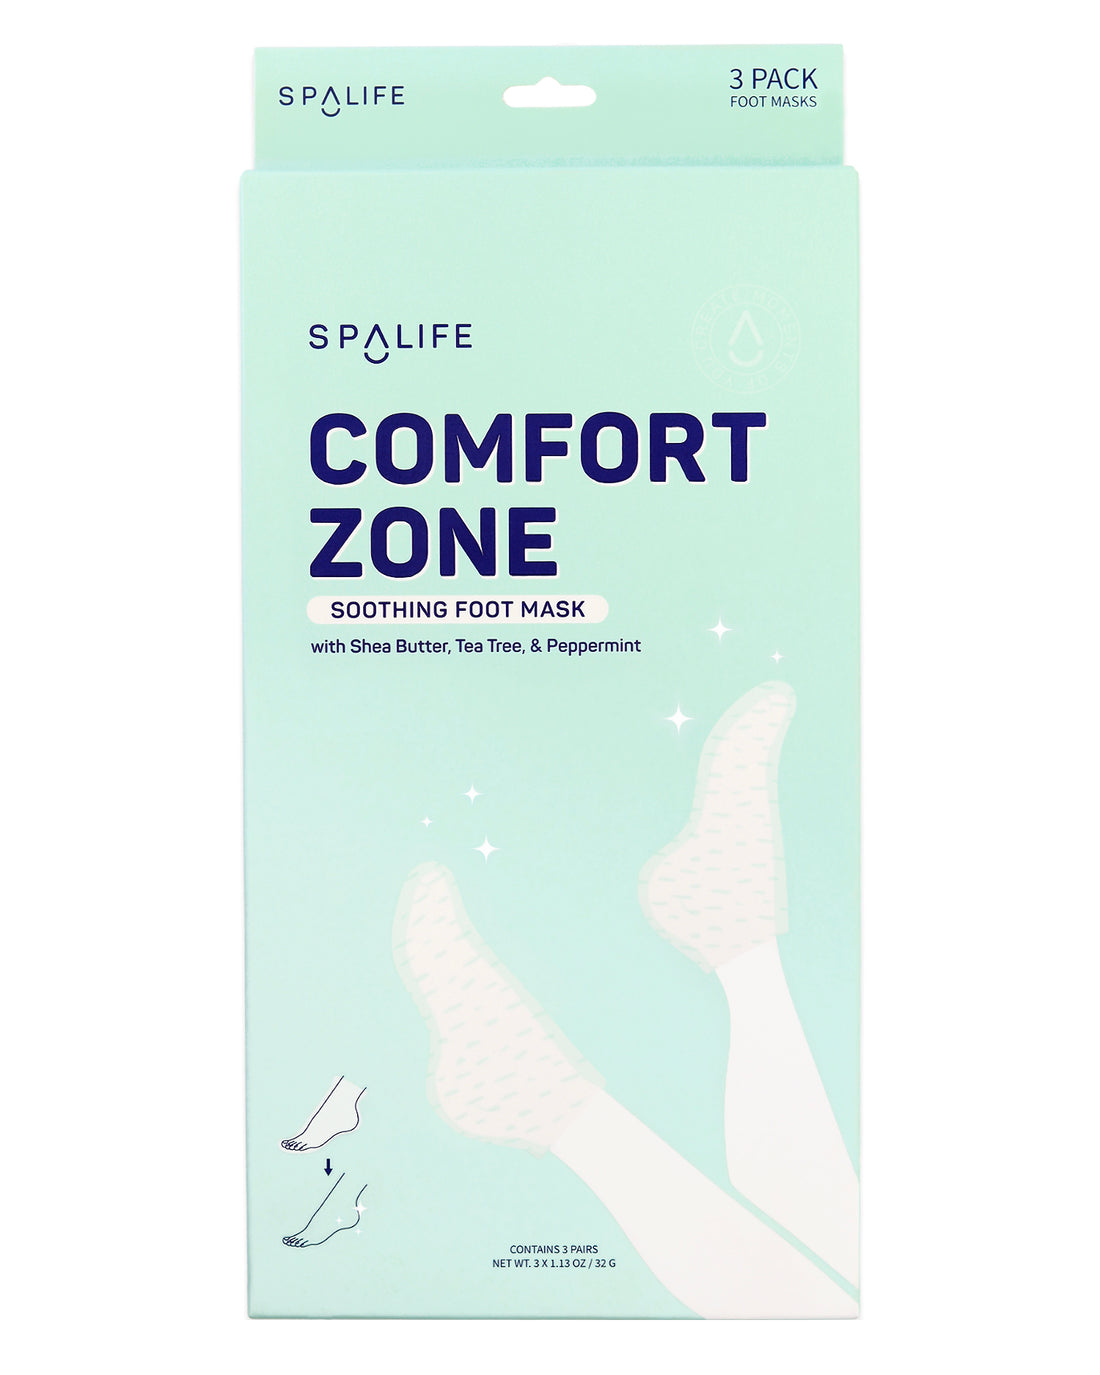 Comfort_zone_soothing_foot_mas-509